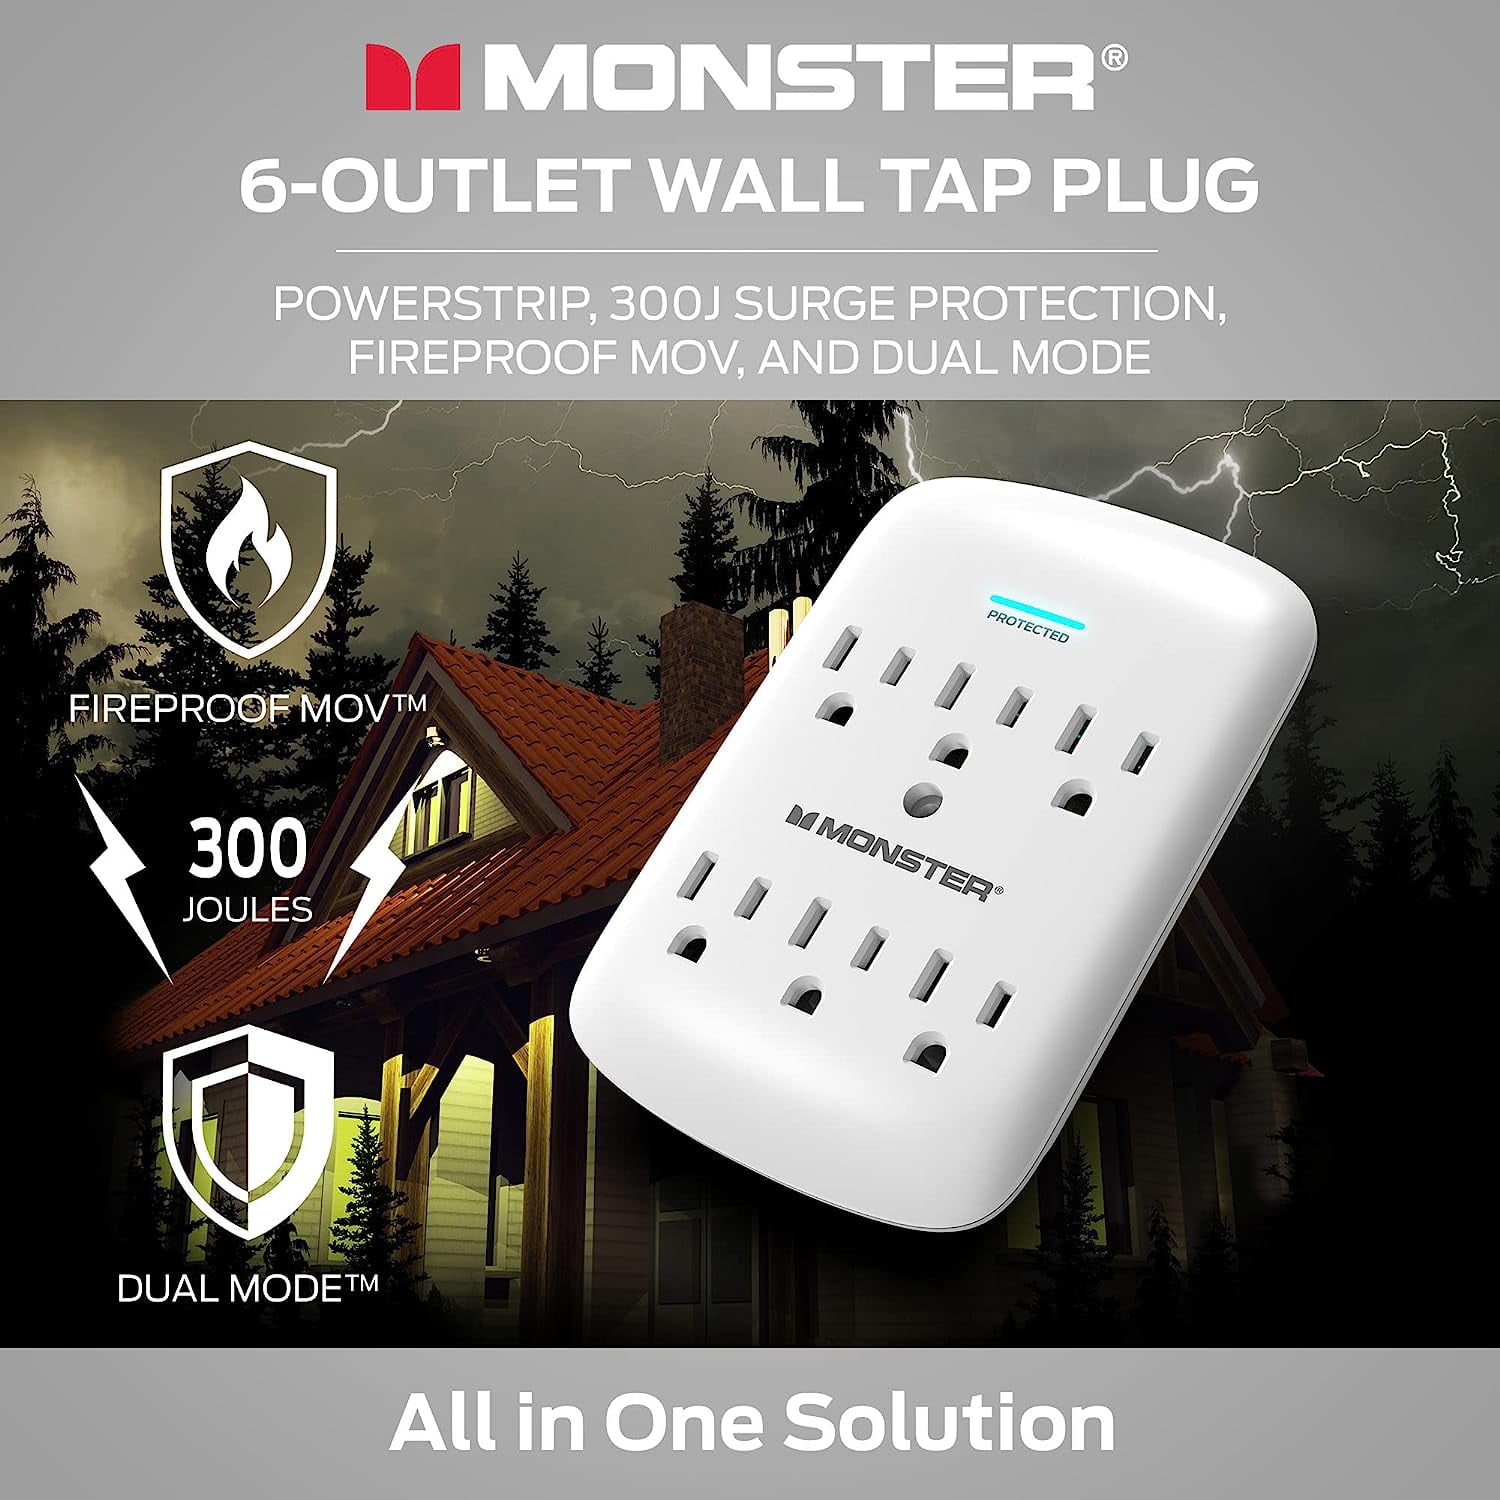 Monster Wall Tap Plug 6-Outlet Extender with Outlet Surge Protector for  Home, Travel, Office, Home Appliances, Computers, and Smart Phone Devices – 